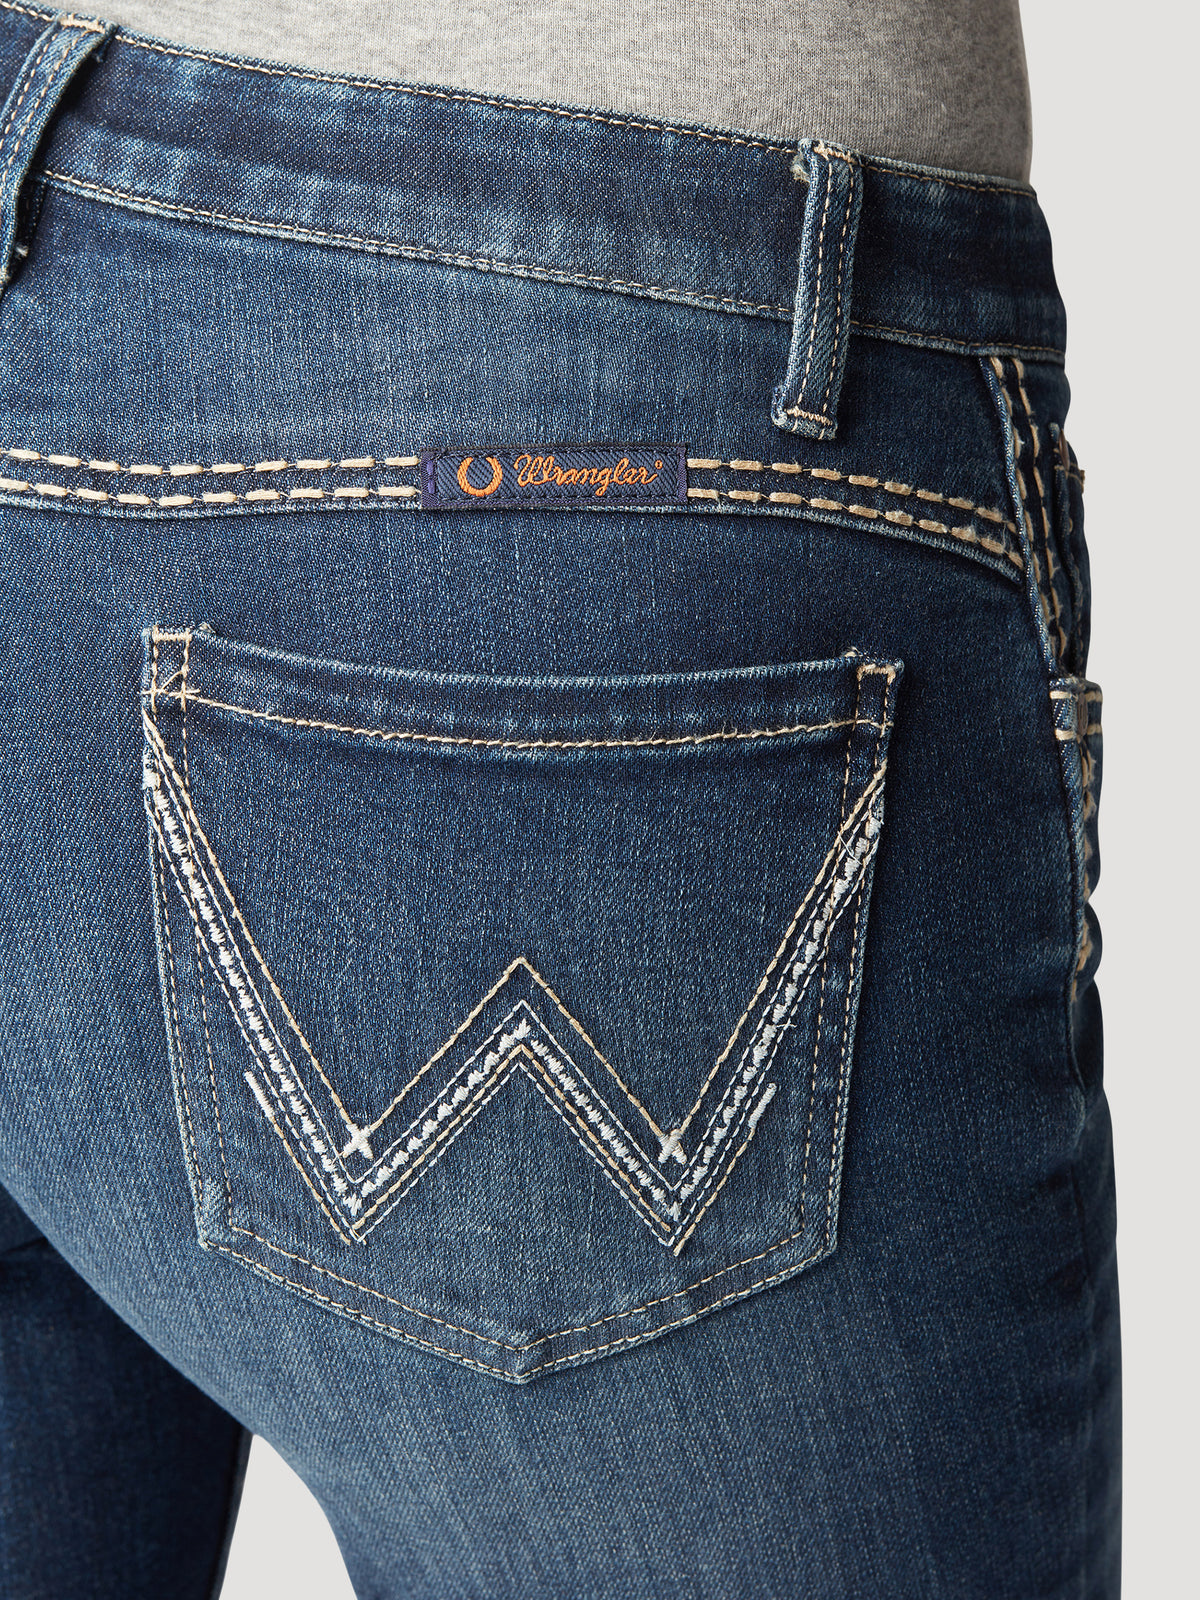 Women's Wrangler Shiloh Ultimate Riding Jean #112321436 | High Country ...